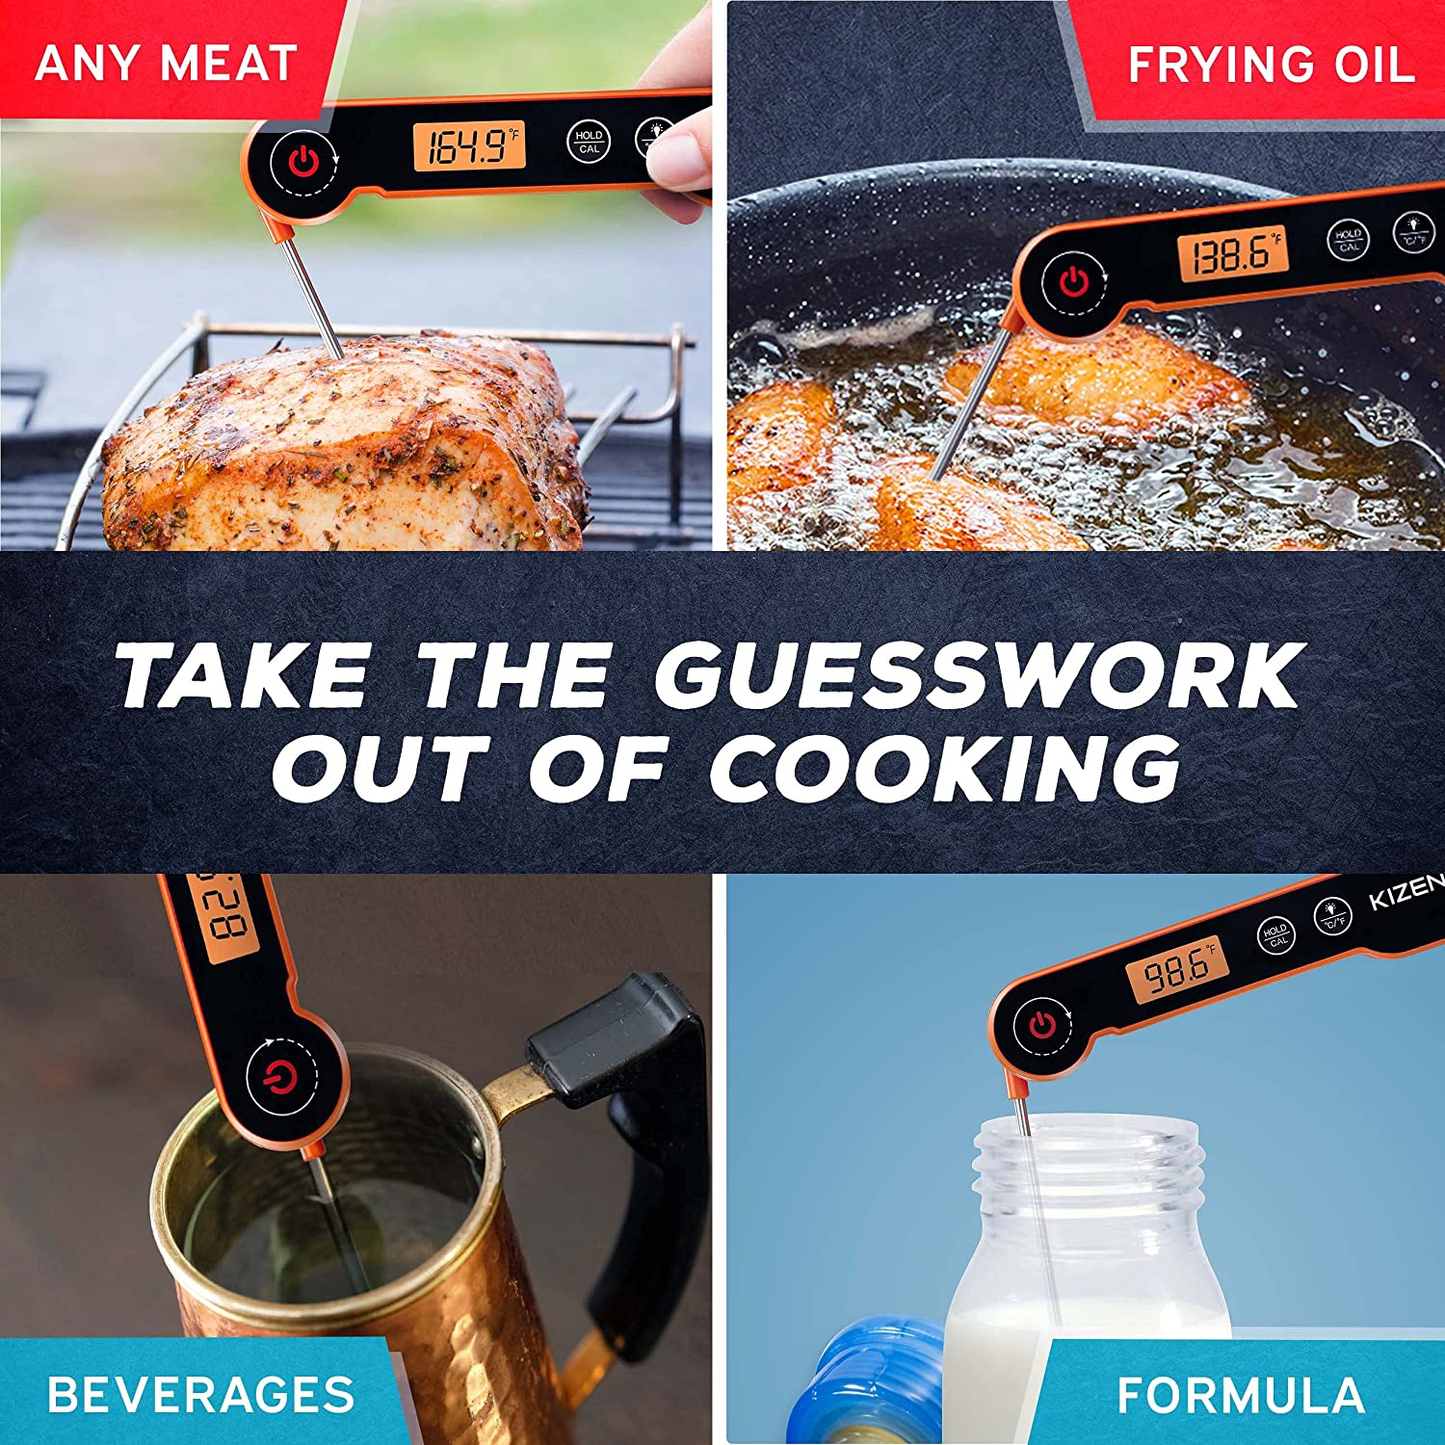 Kizen Digital Meat Thermometers for Cooking - Waterproof Instant Read Food Thermometer for Meat, Deep Frying, Baking, Outdoor Cooking, Grilling, & BBQ (Orange/Black)